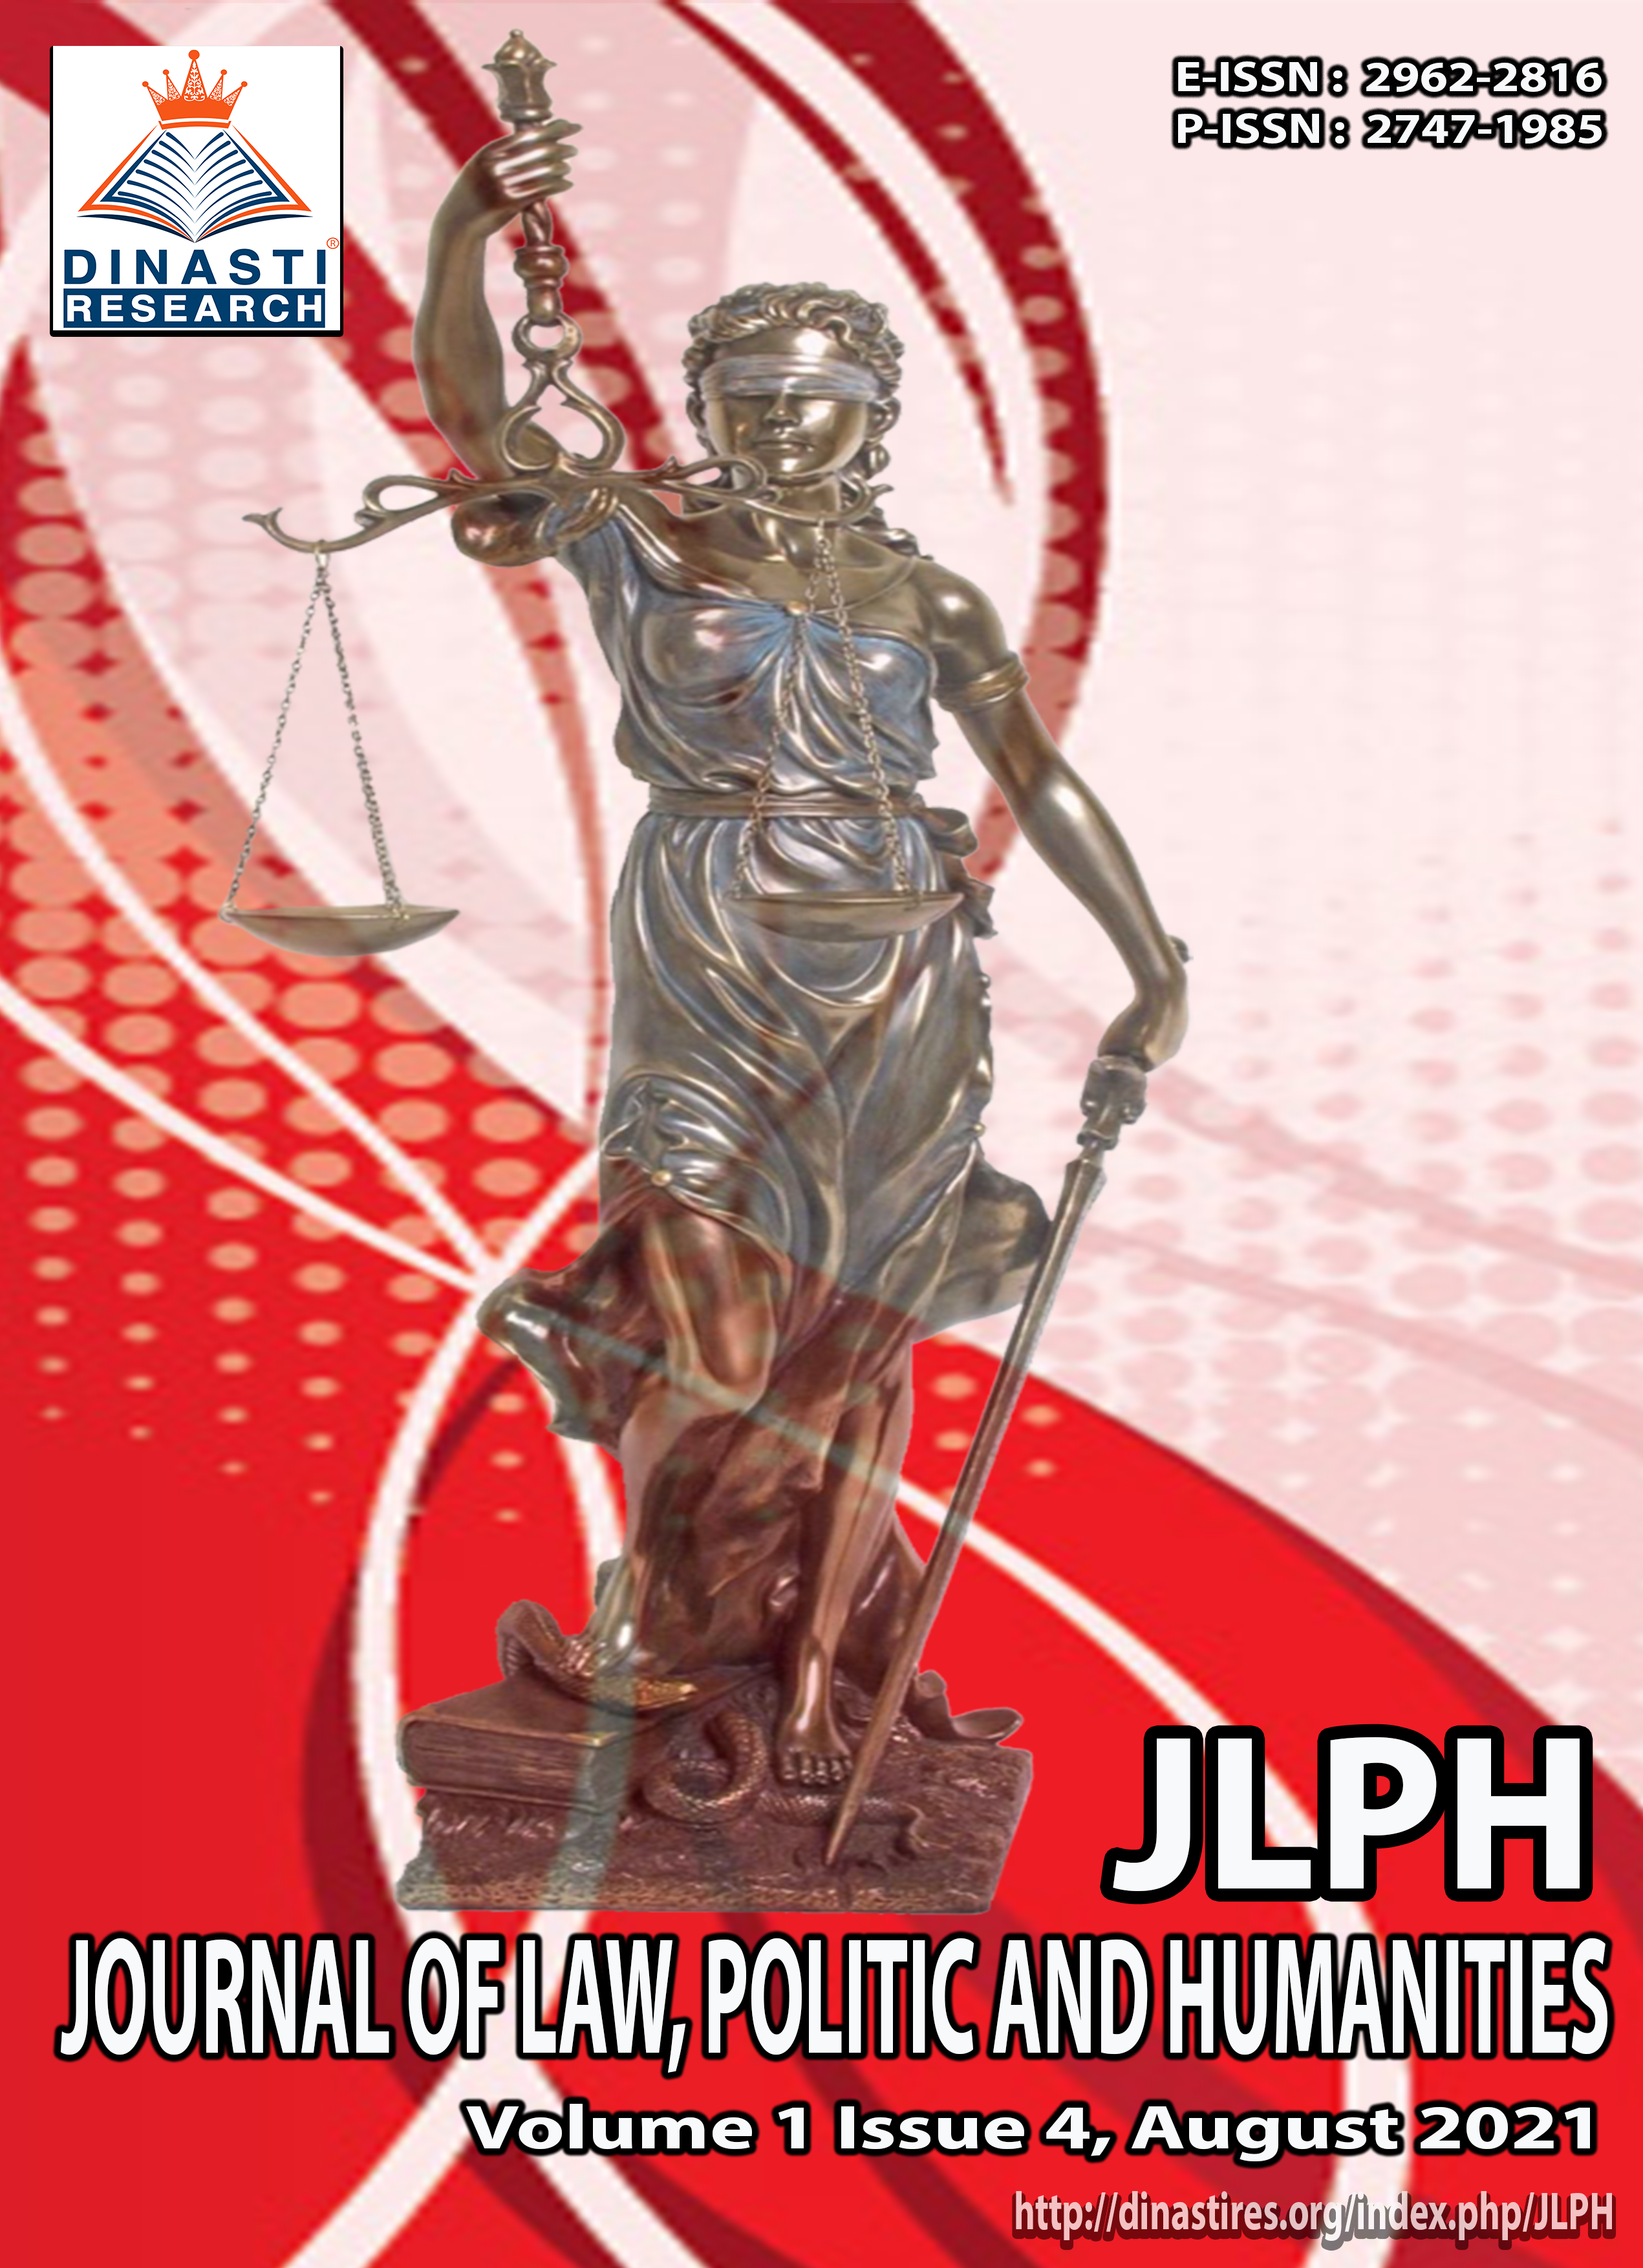 					View Vol. 1 No. 4 (2021): (JLPH) Journal of Law, Politic and Humanities (August 2021)
				